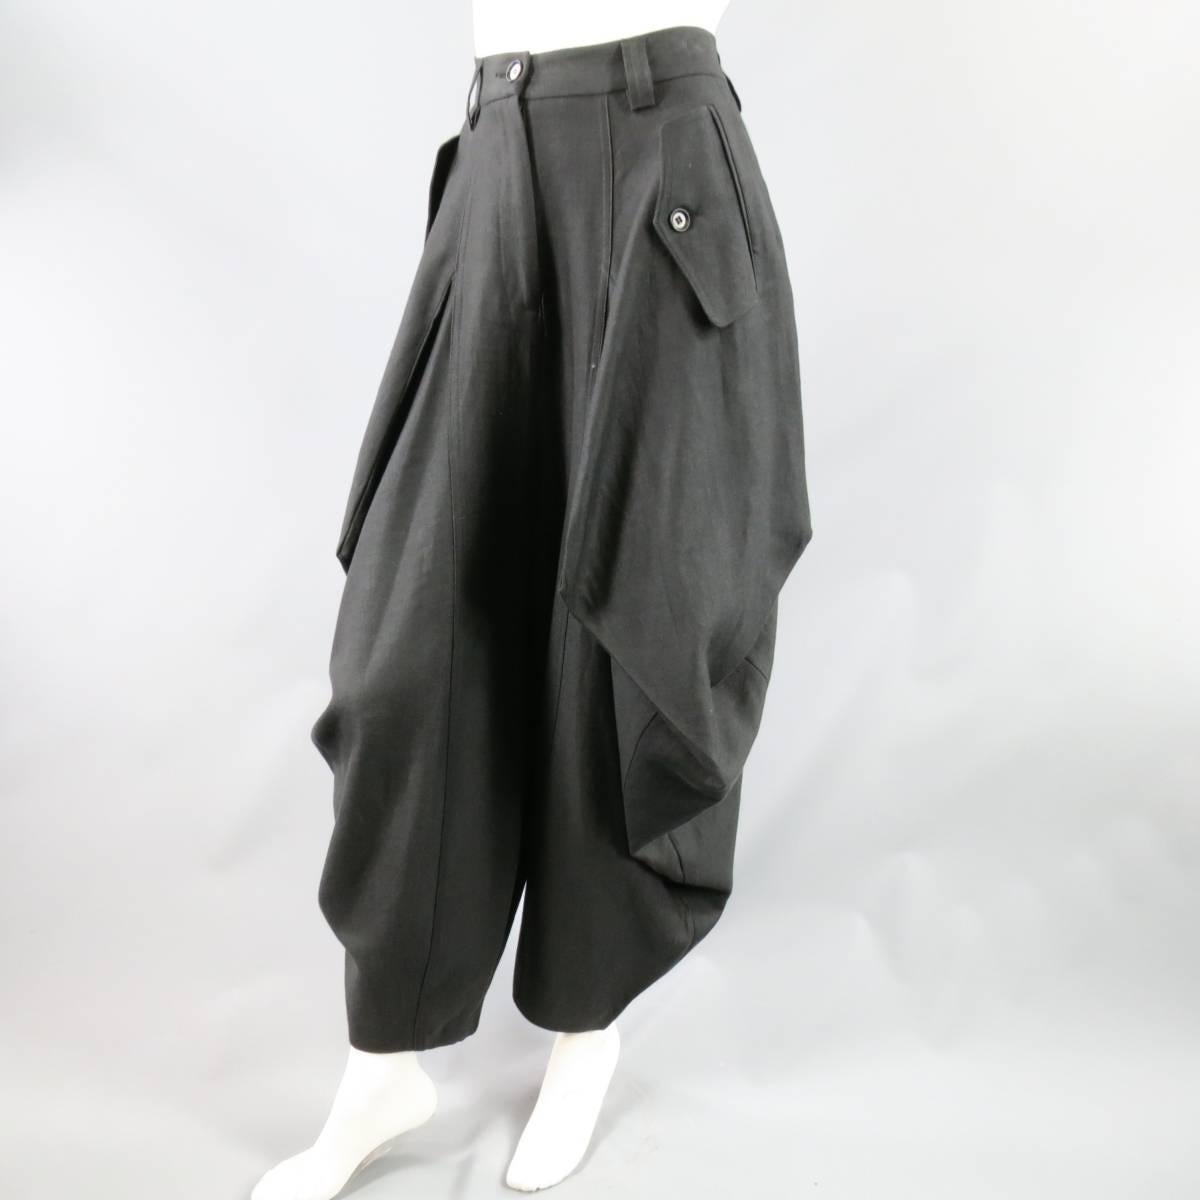 These ultra chic IVAN GRUNDAHL drop crotch trousers come in a charcoal wool twill with symmetrical, slanted, flap hip pockets and unique geometric seam Origami drape construction. Made in Portugal.
 
Excellent Pre-Owned Condition.
Marked: 36
